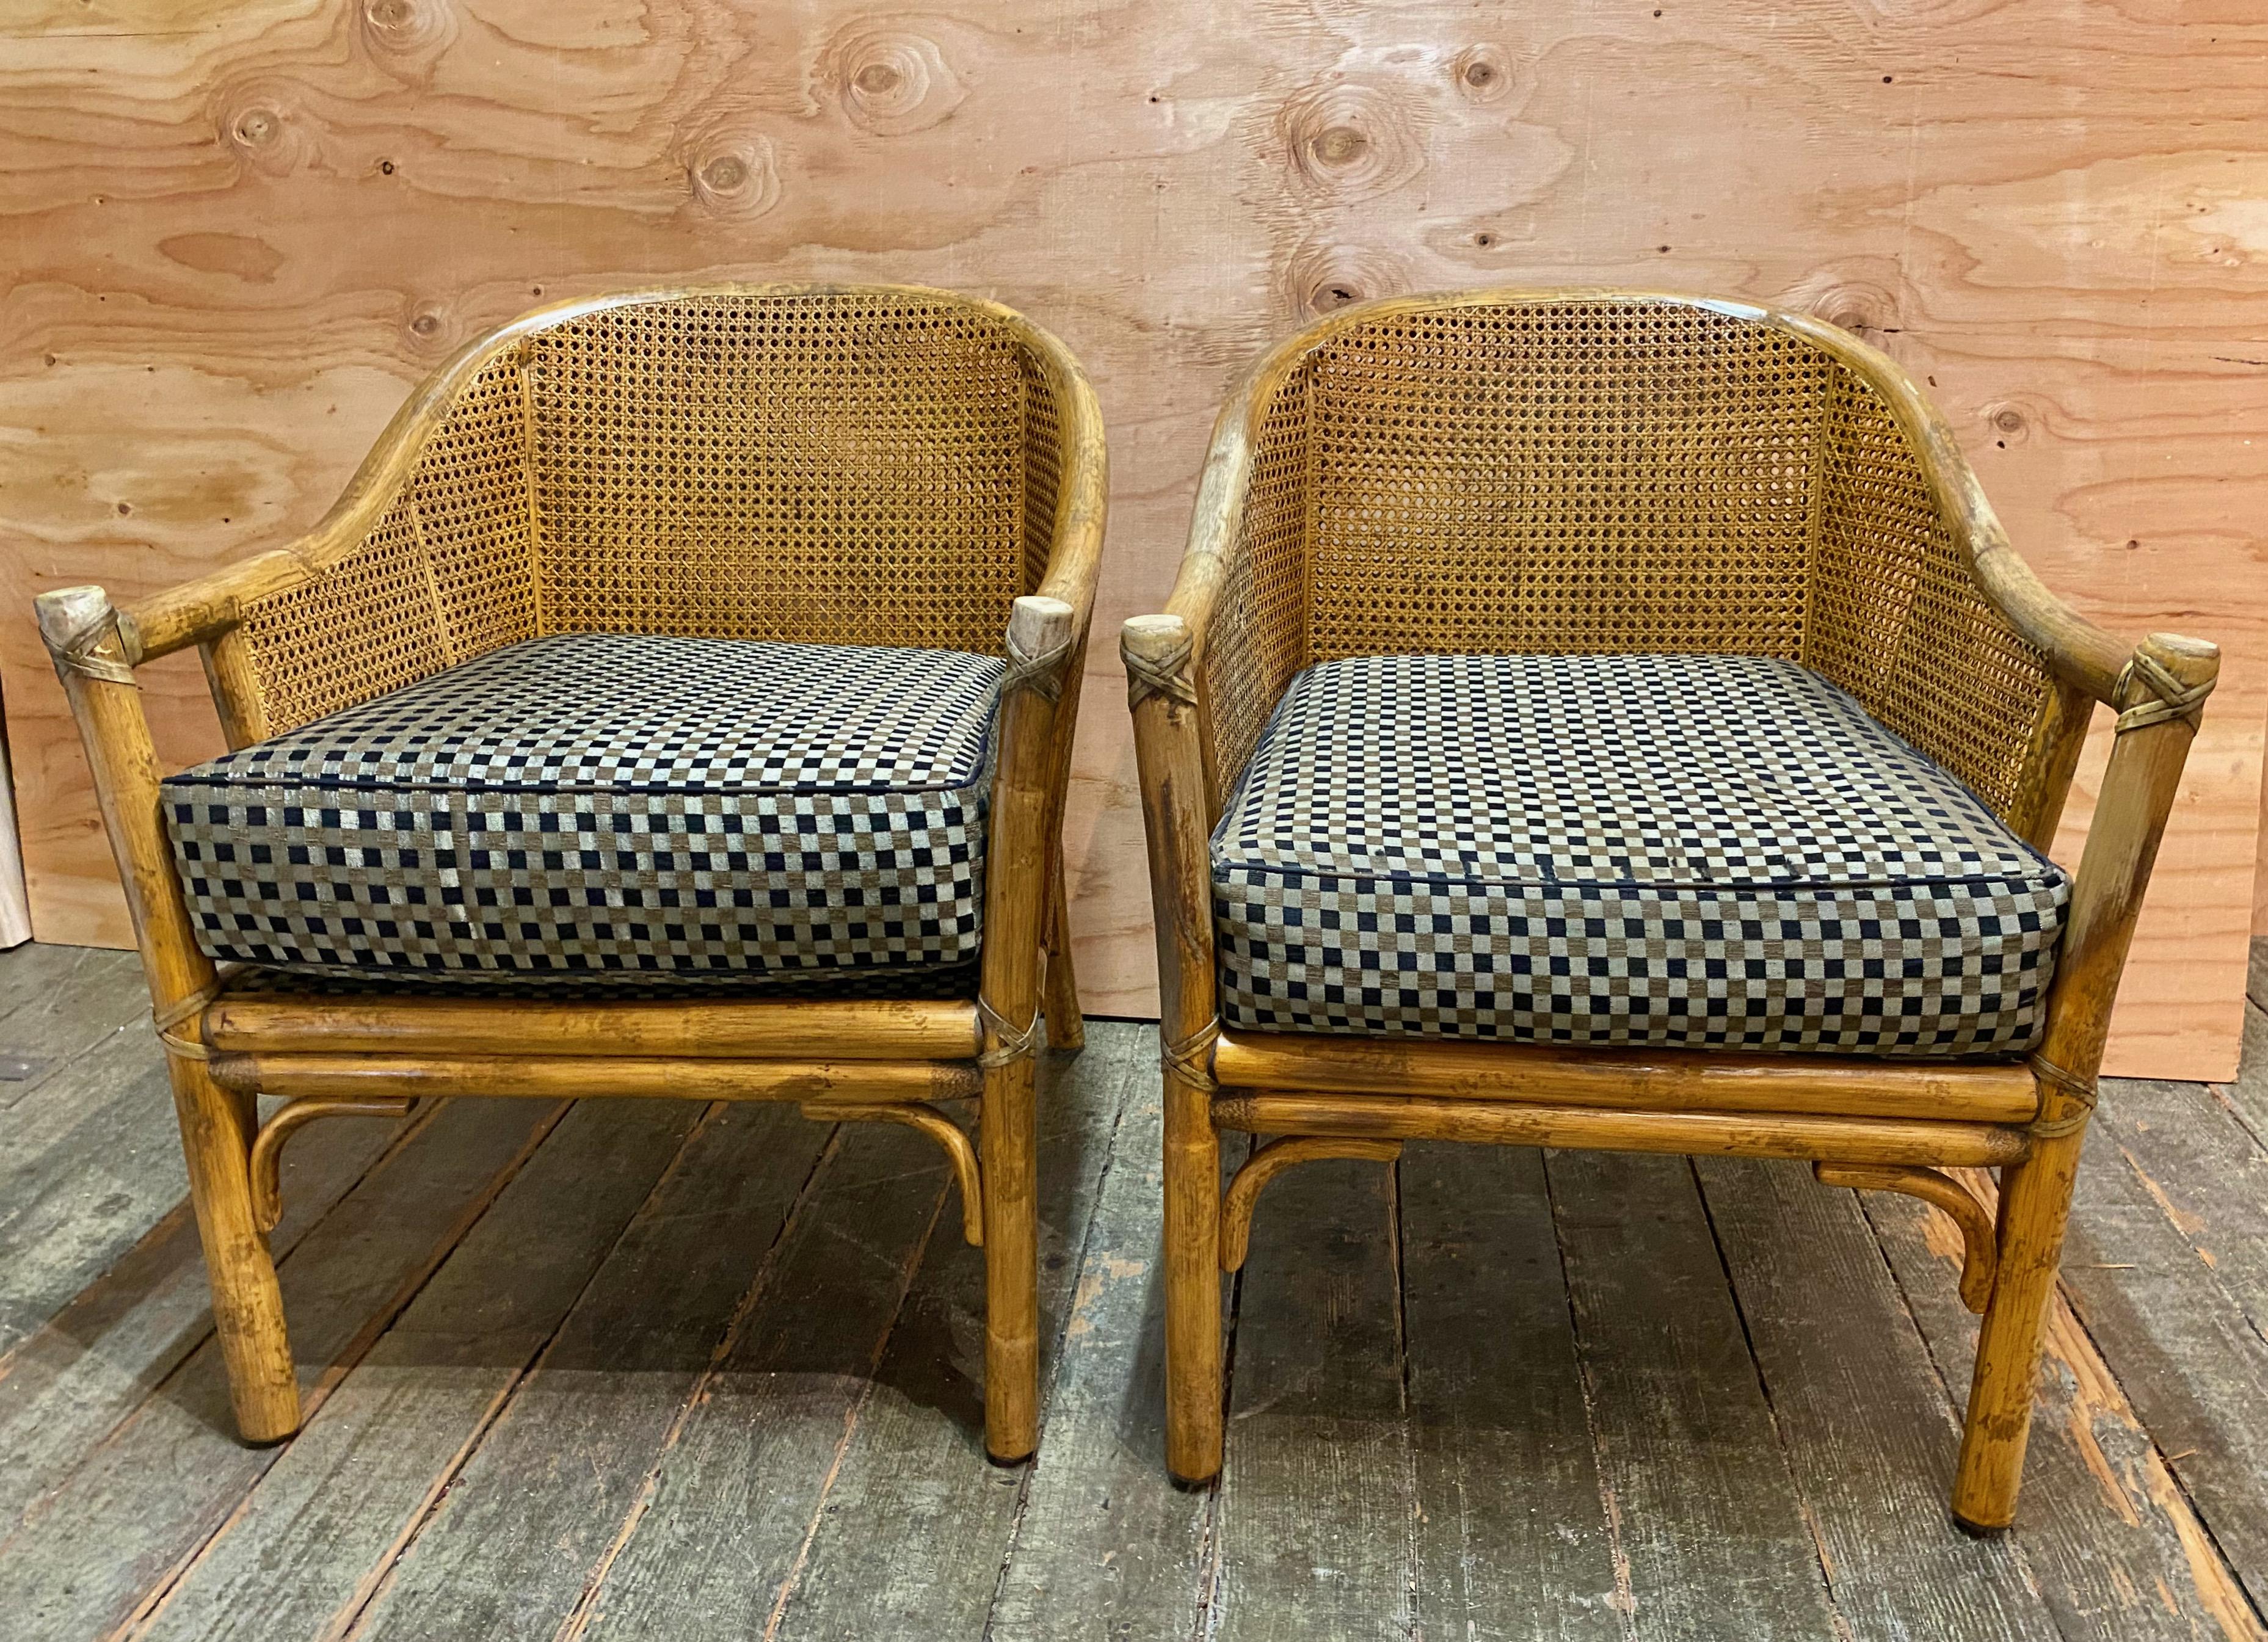 This is a great pair of McGuire Barrel Back arm chairs that feature double cane sides and back with deep seat cushions. These chairs are a good representation of Coastal Style with their bamboo frames, chinoiserie influence and quality caning. The